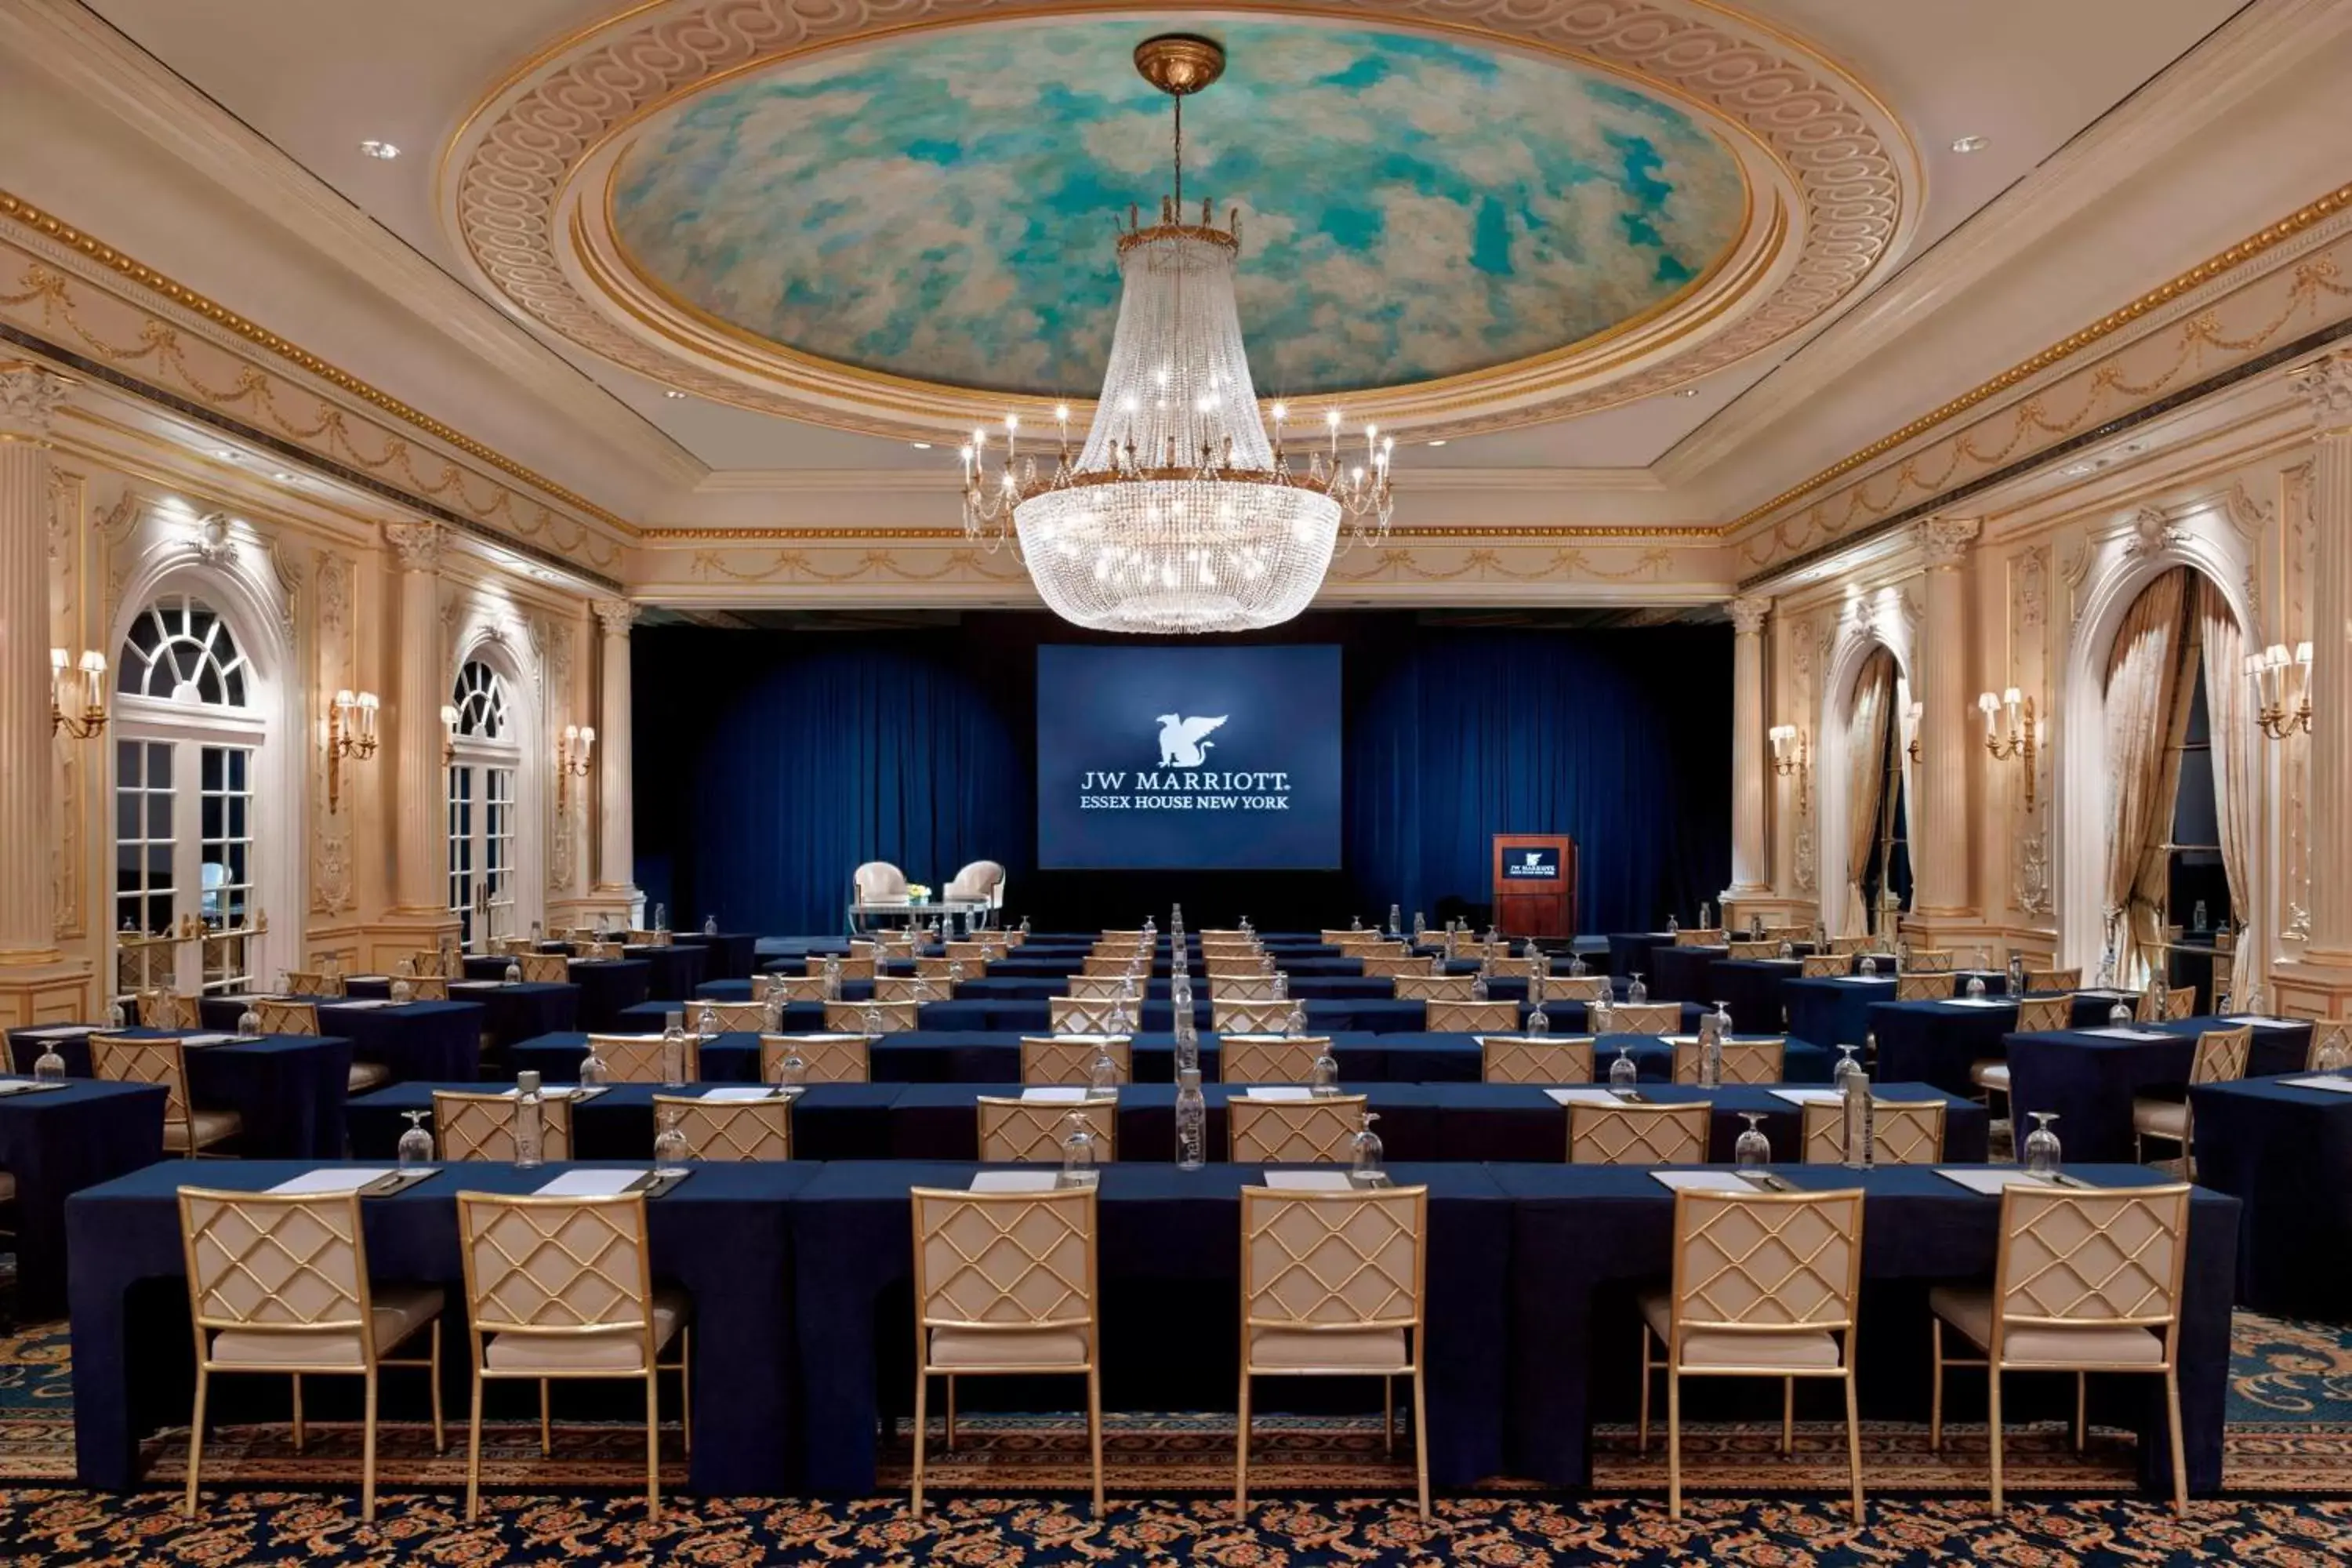 Meeting/conference room in JW Marriott Essex House New York